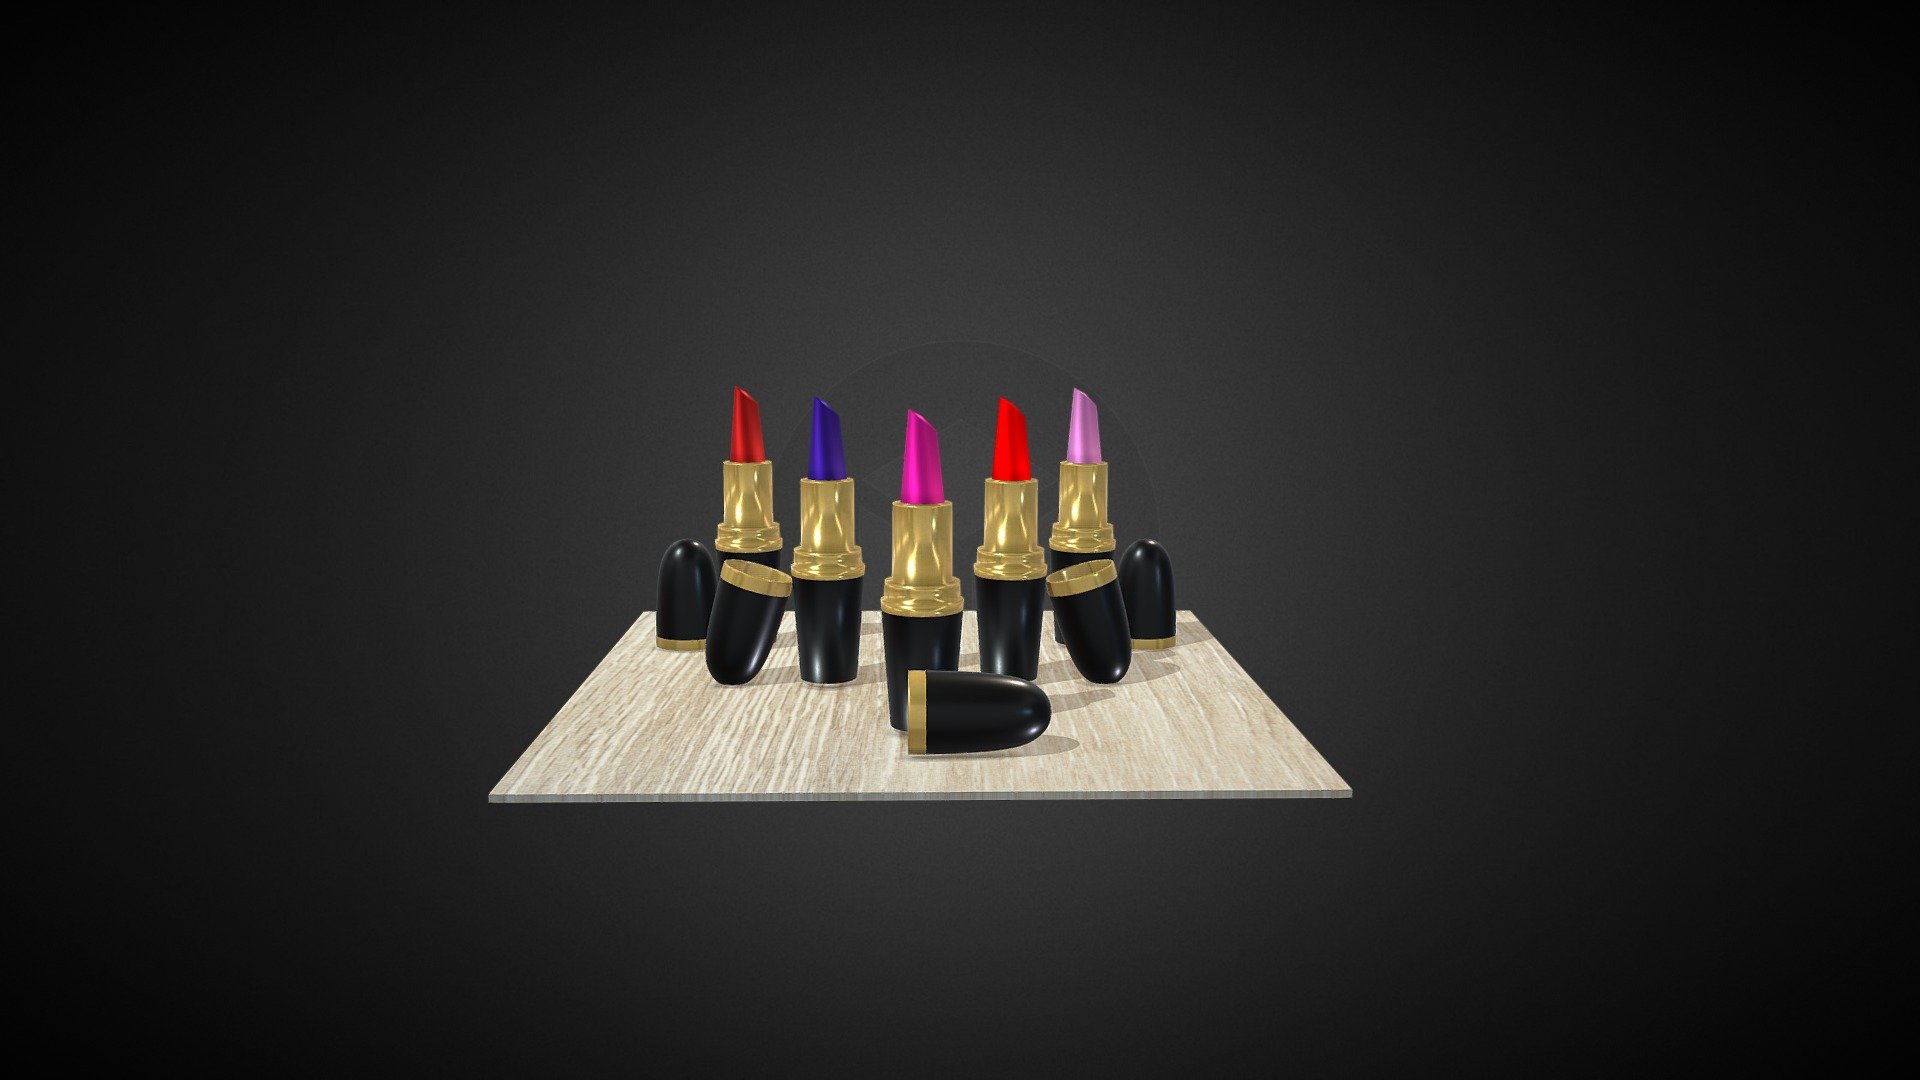 Fashionable Lipsticks with different colors. Free to use! - Lipsticks - Download Free 3D model by Akshat (@shooter24994) 3d model